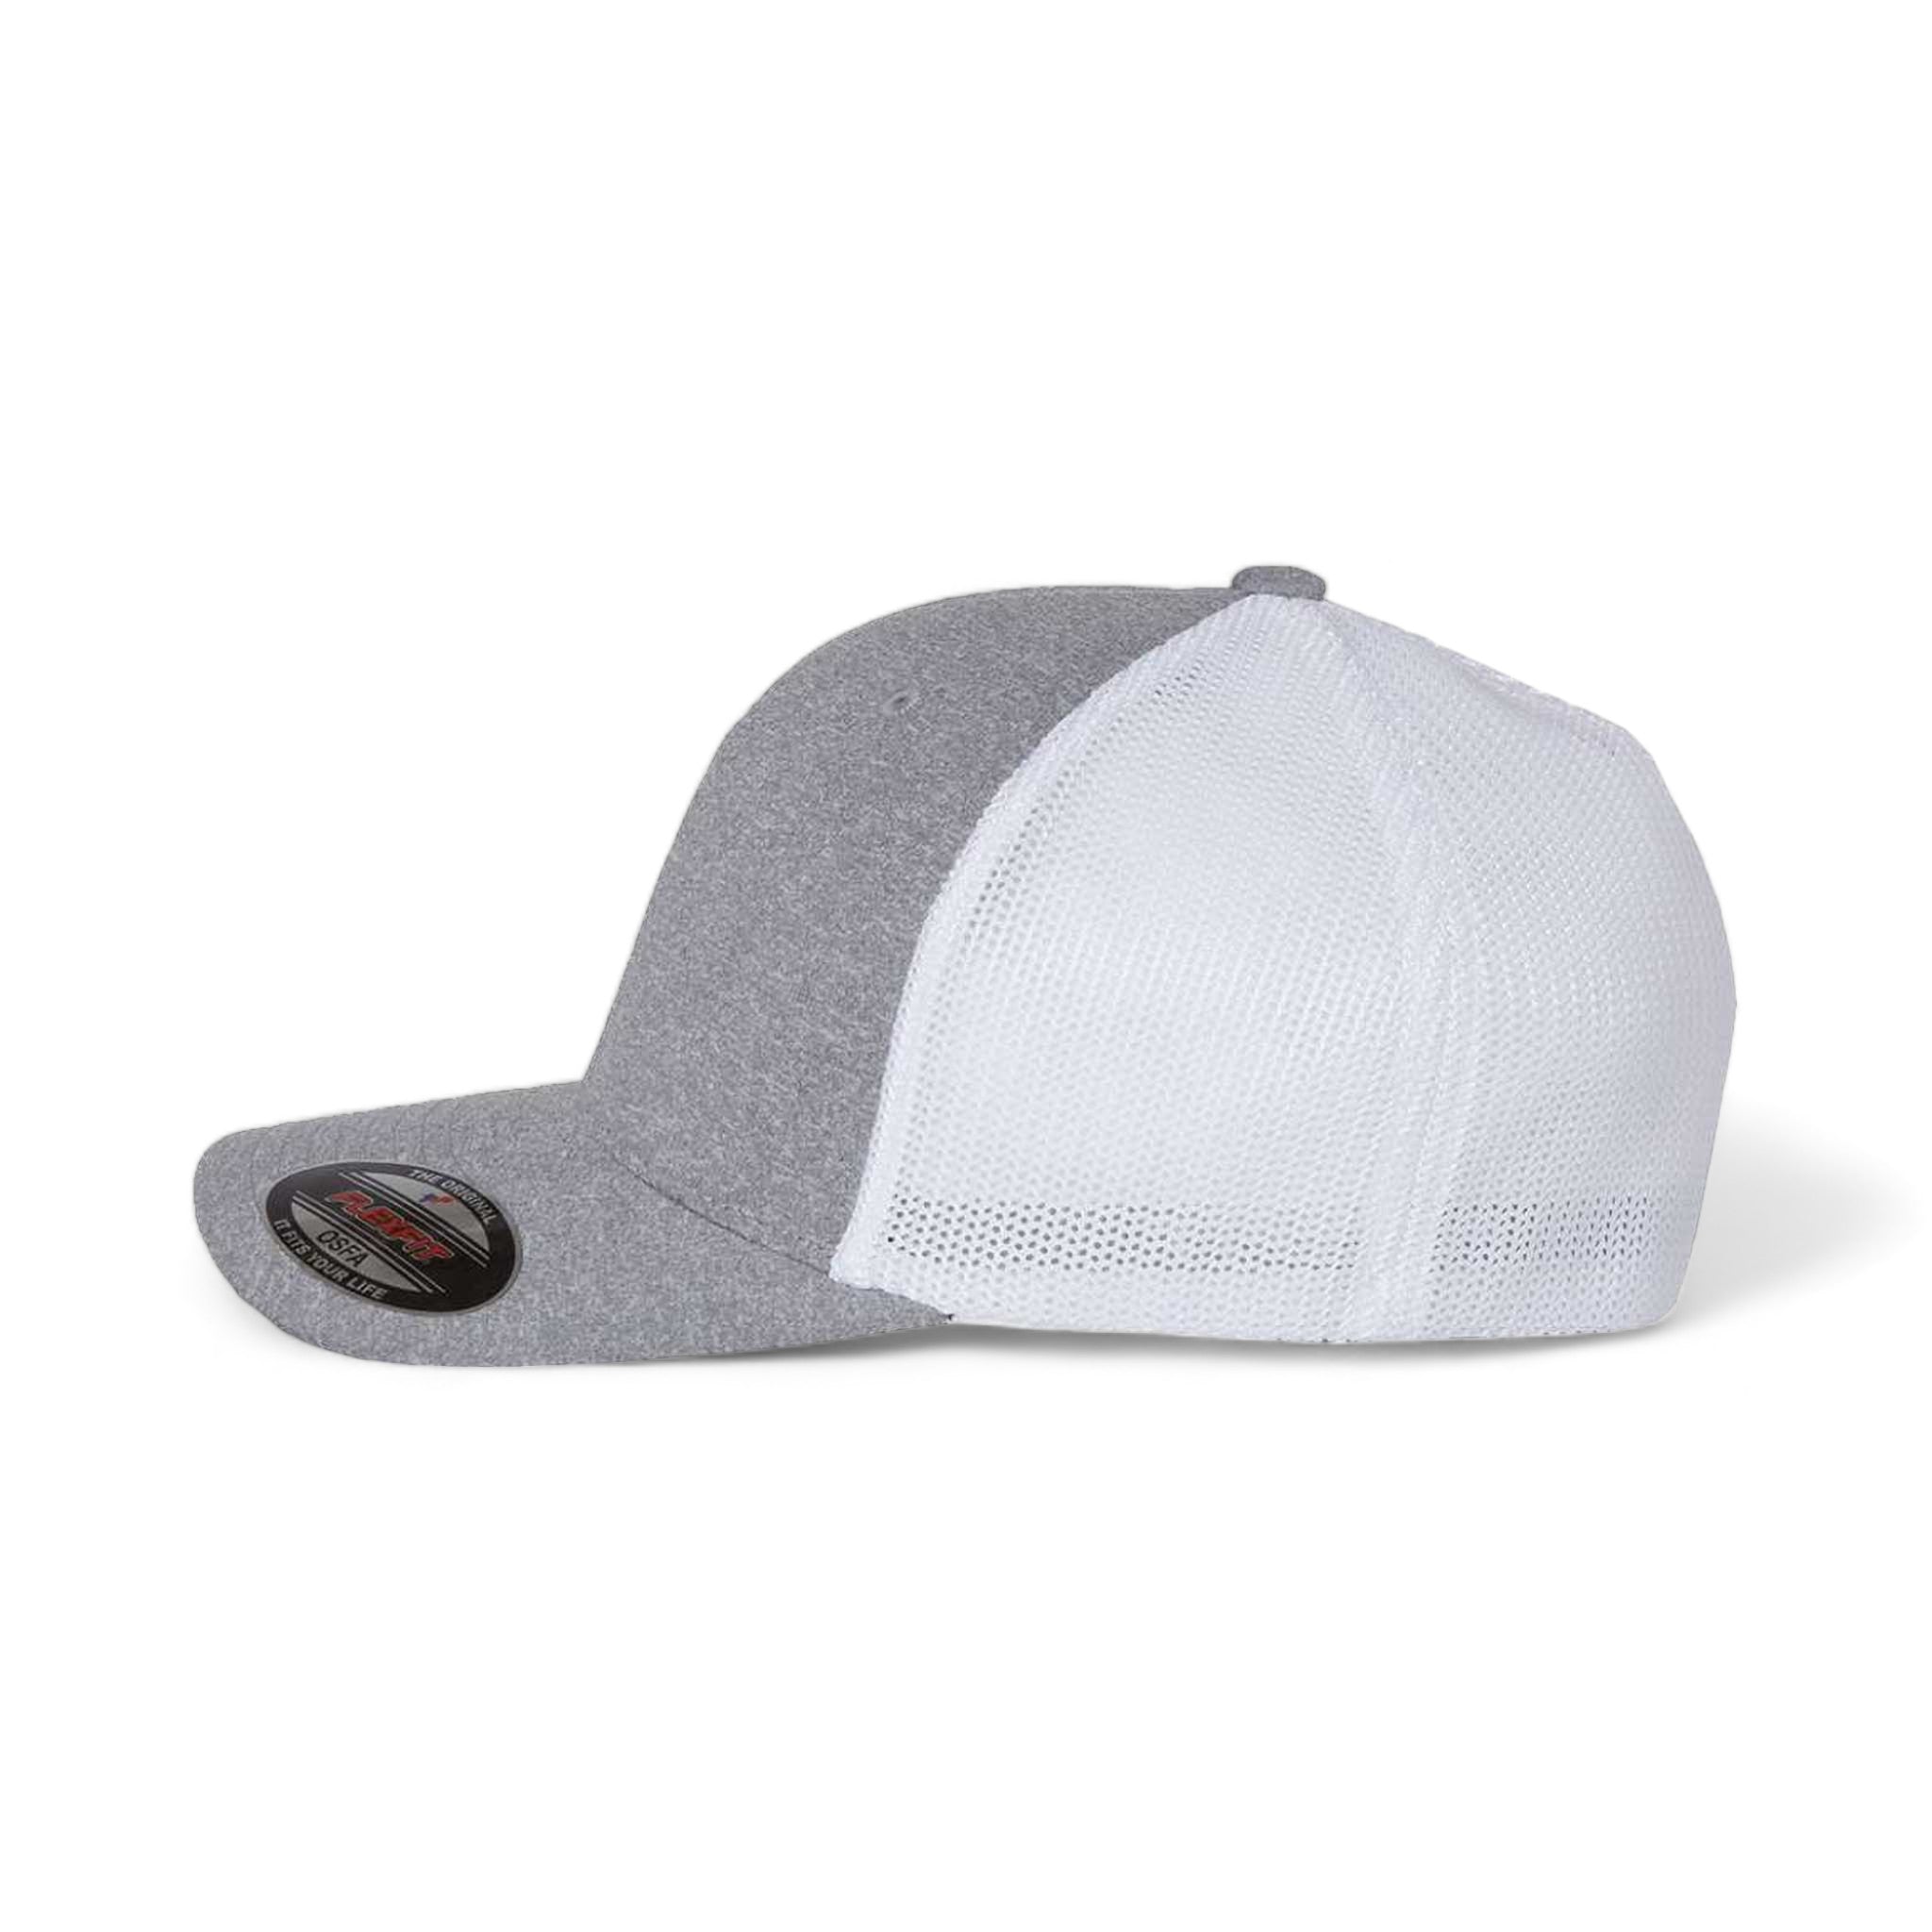 Side view of Flexfit 6311 custom hat in heather grey and white